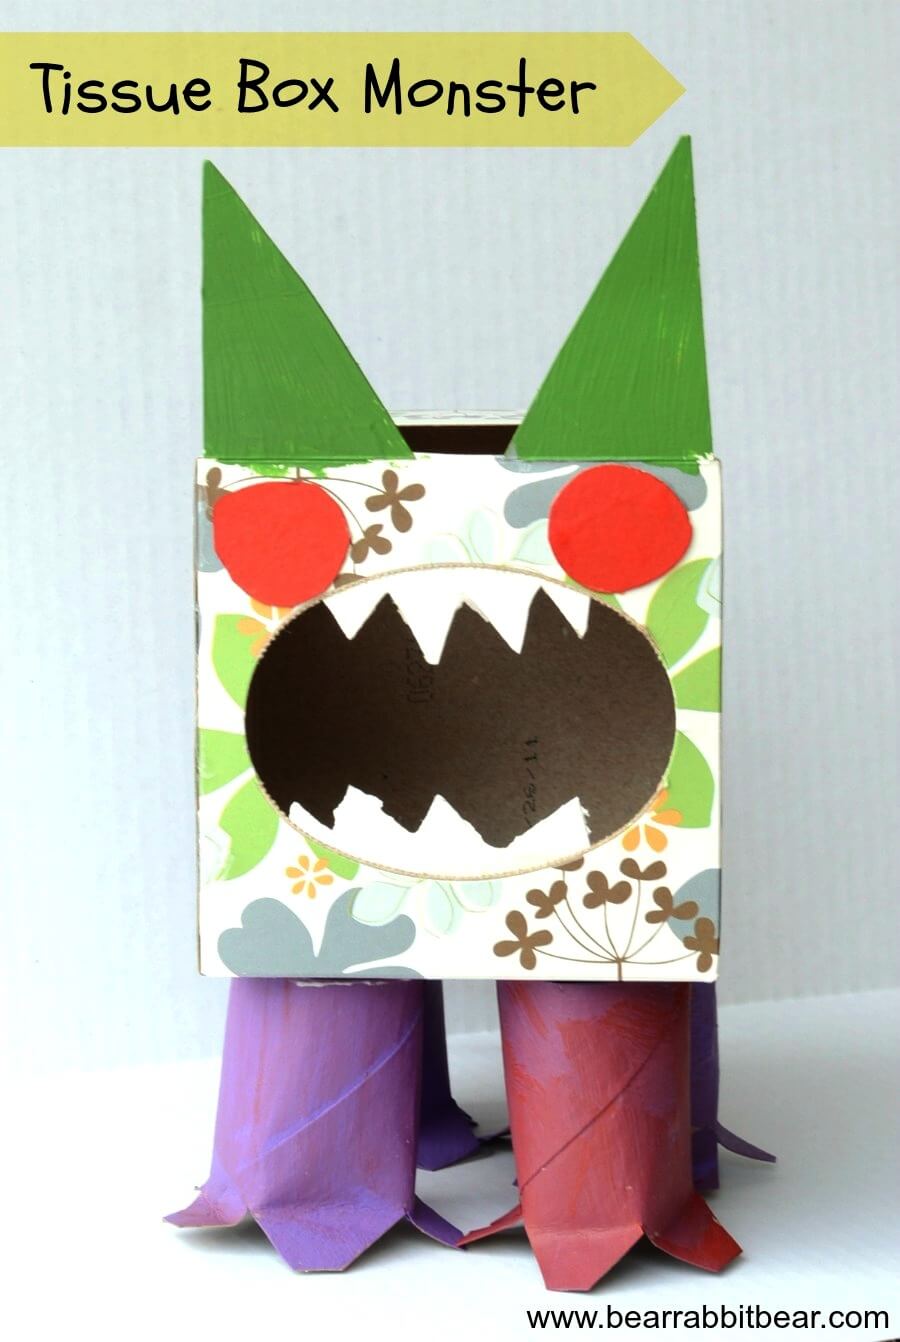 Daunting Tissue Box Monster Craft For KidsRecycled Tissue Box Monster Crafts